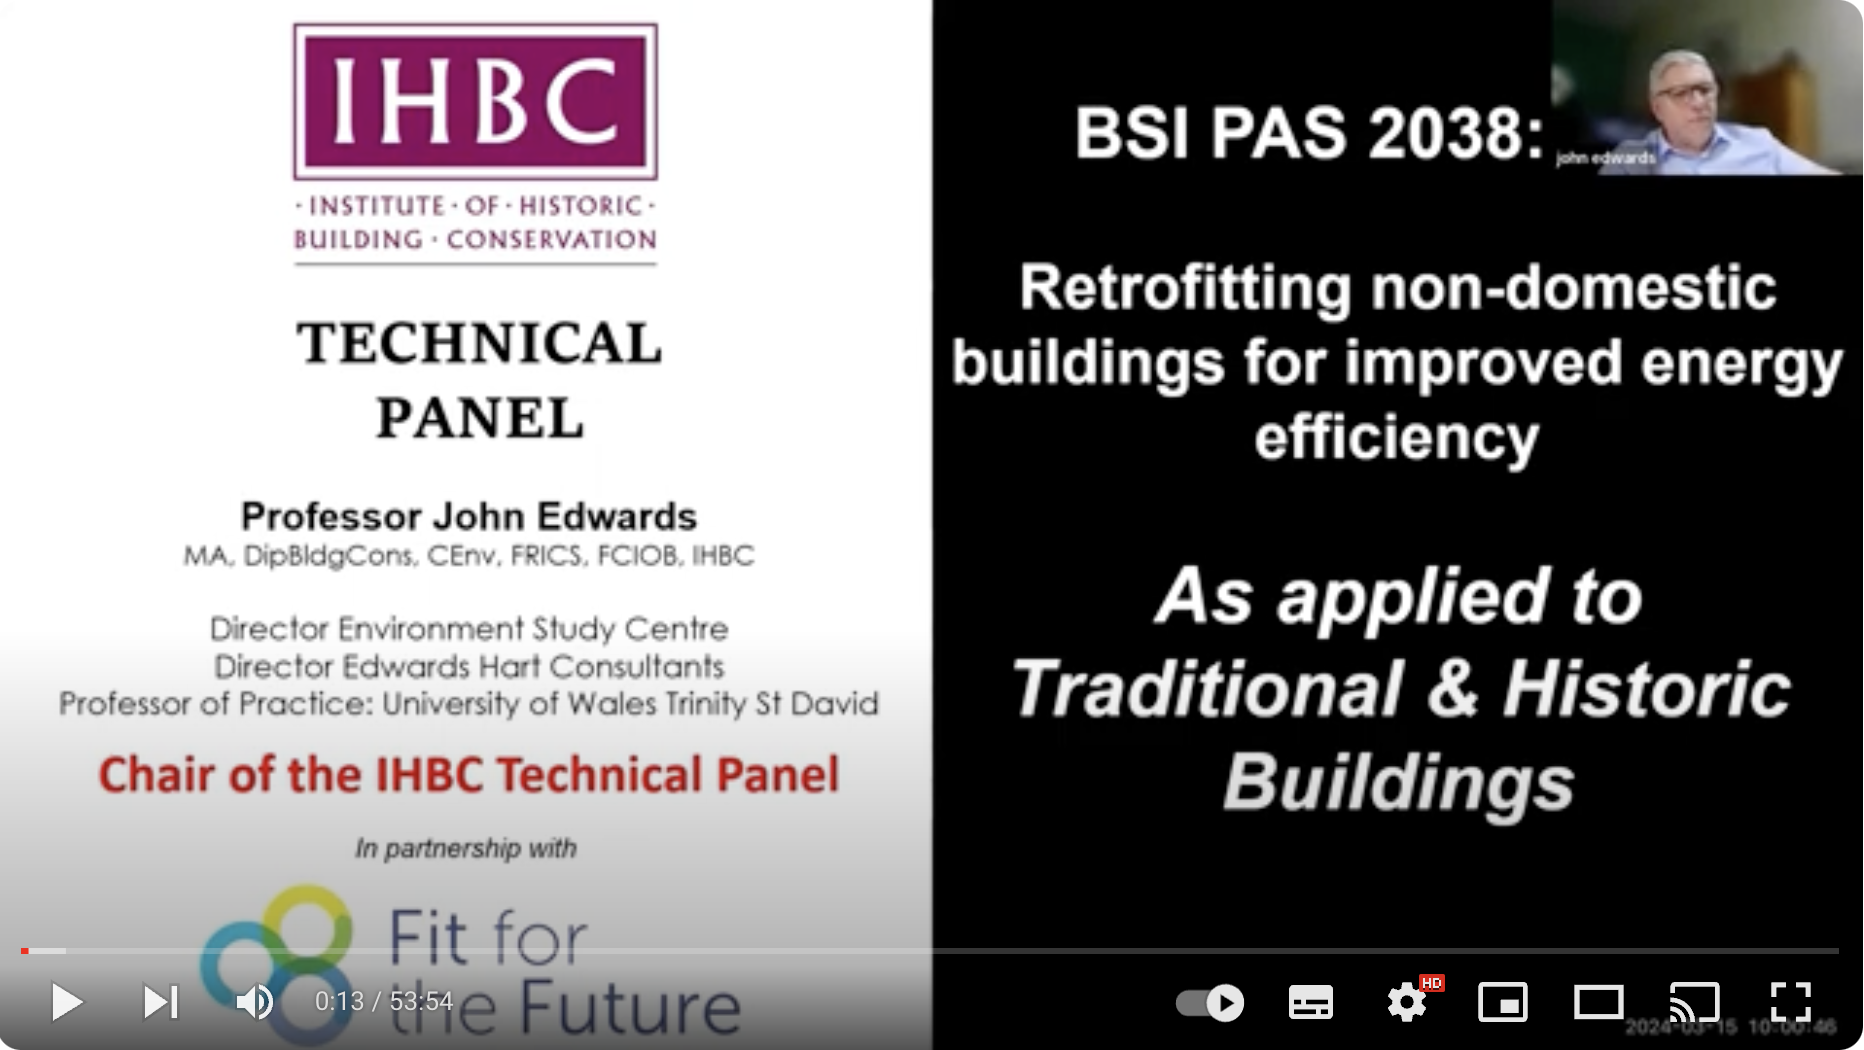 Applying BSI’s PAS 2038 Retrofit of Heritage & Traditional Non-Domestic Buildings